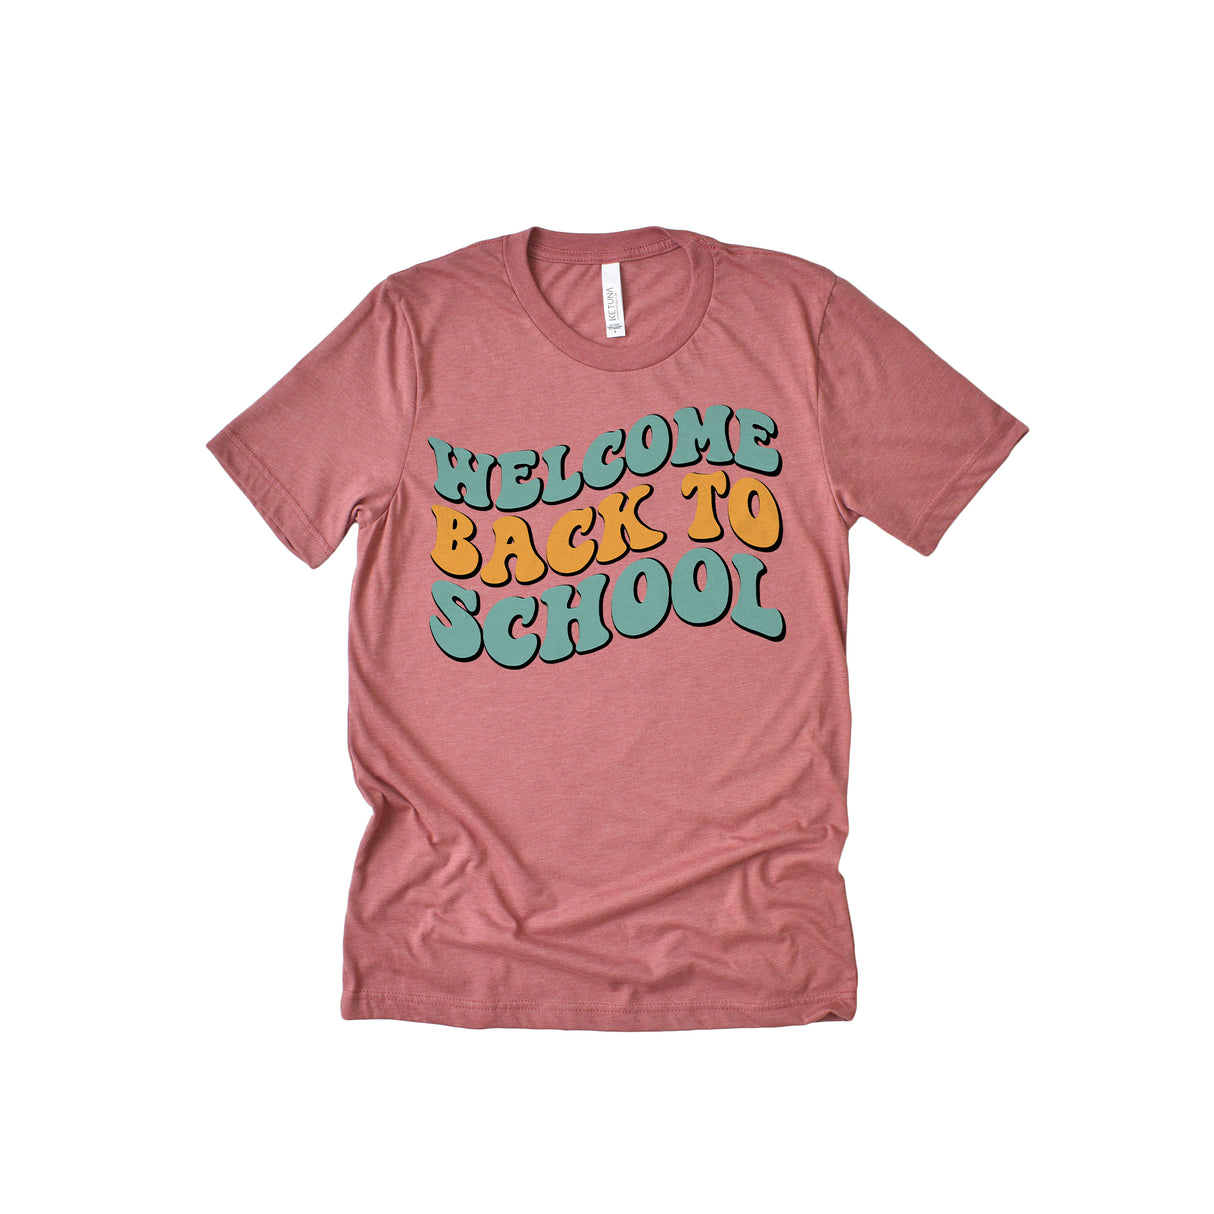 Welcome Back To School Adult T-Shirt